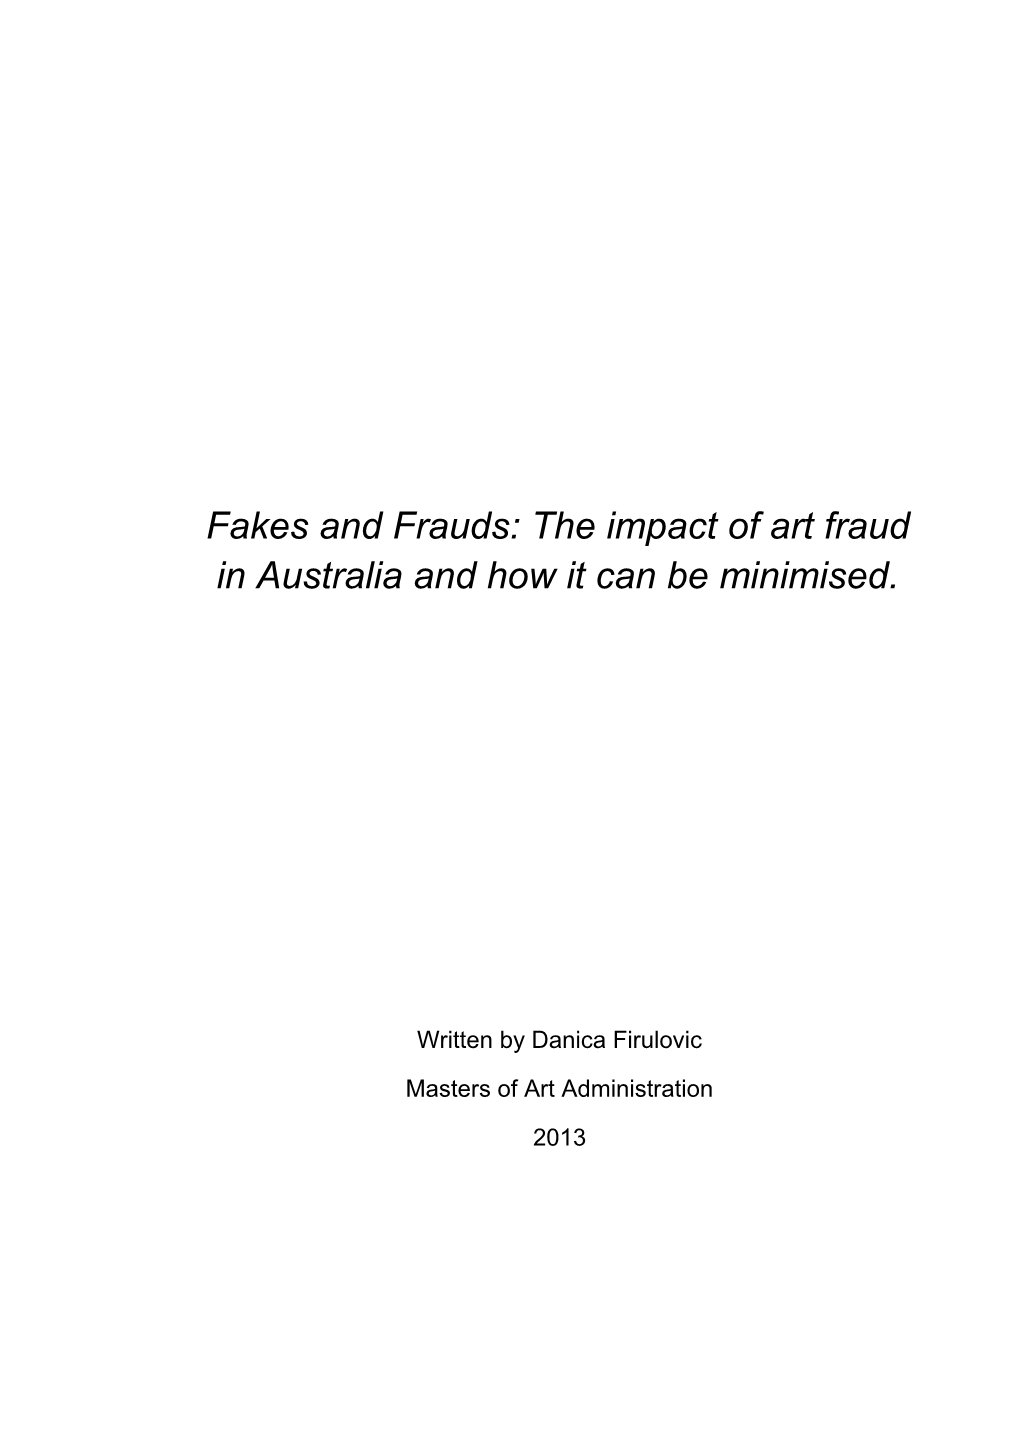 Fakes and Frauds: the Impact of Art Fraud in Australia and How It Can Be Minimised